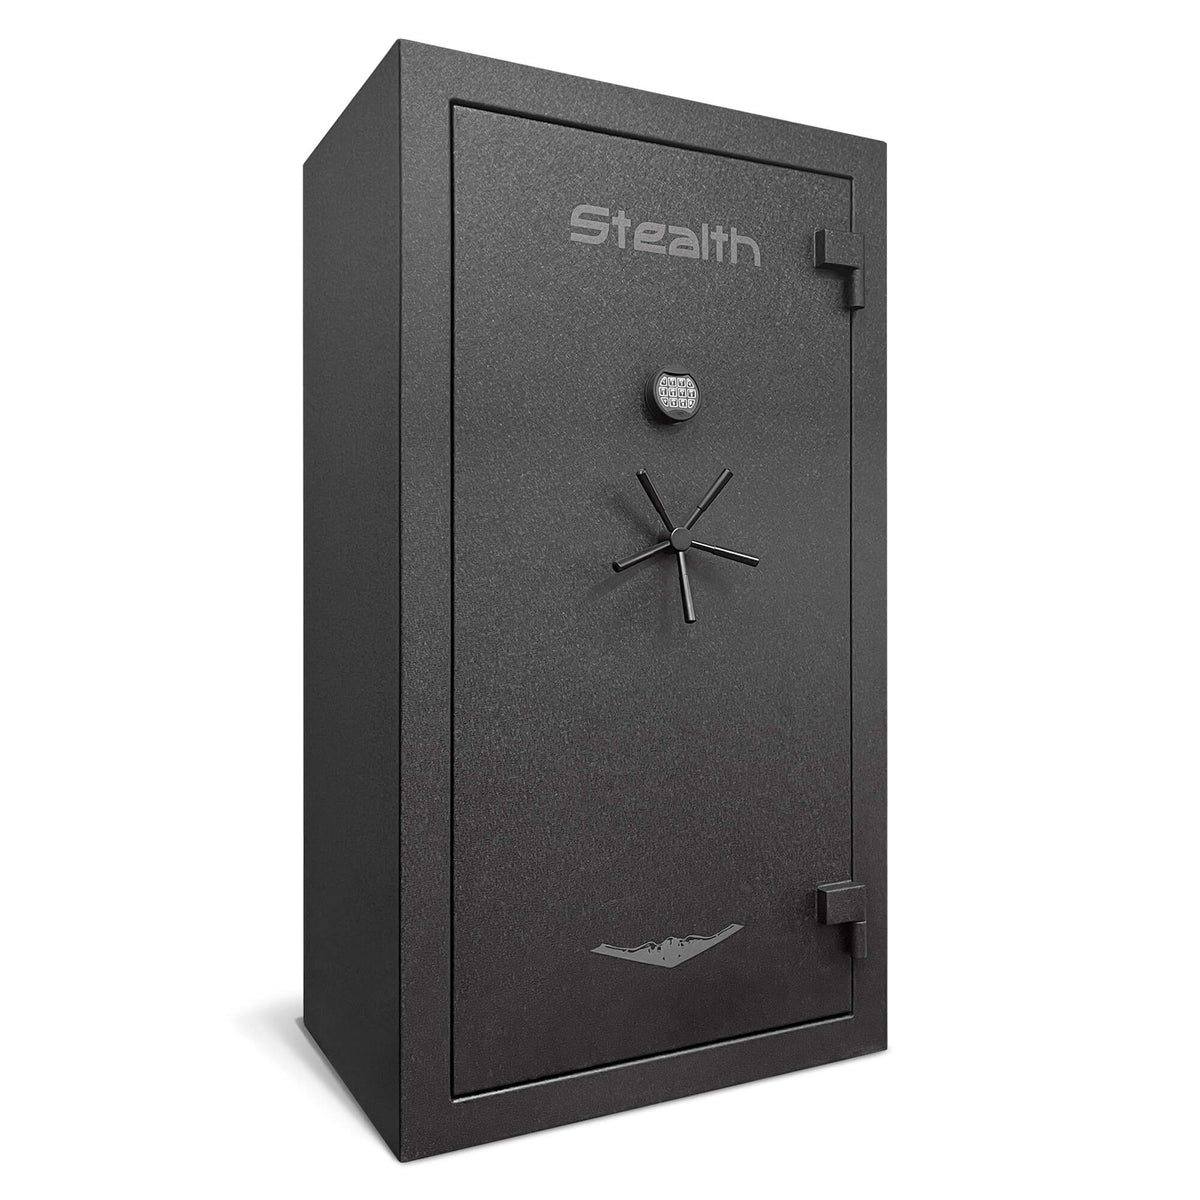 Stealth UL 36 | 1 hour Fire Protection | 66&quot; x 36&quot; x 29&quot;